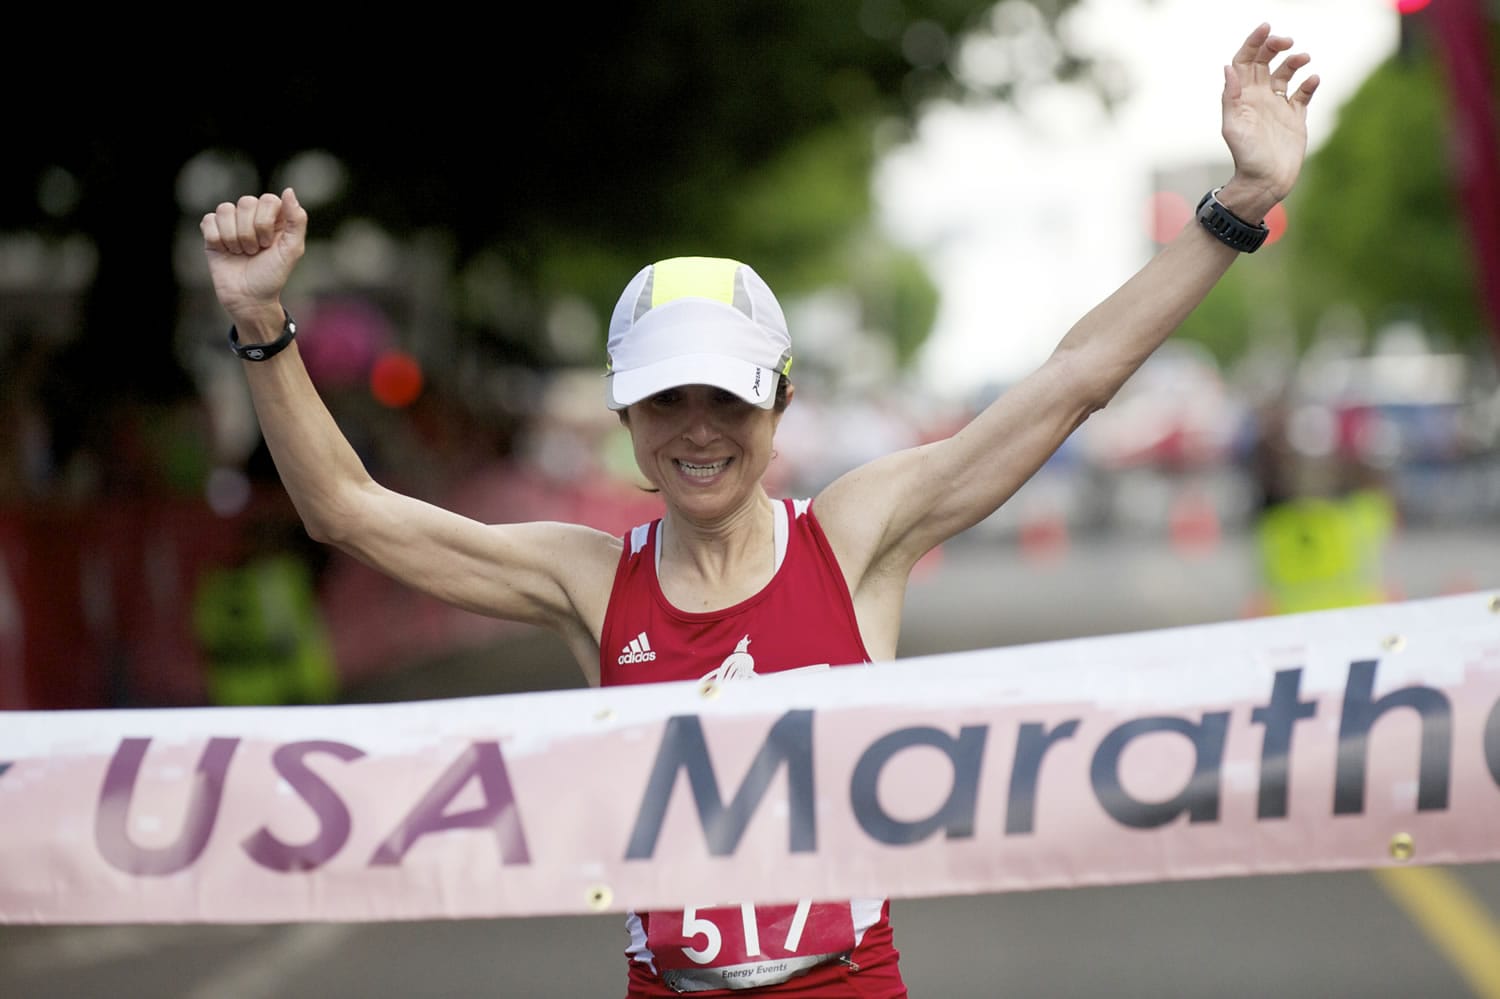 Angie Fiese, women's winner of the Vancouver USA Marathon.